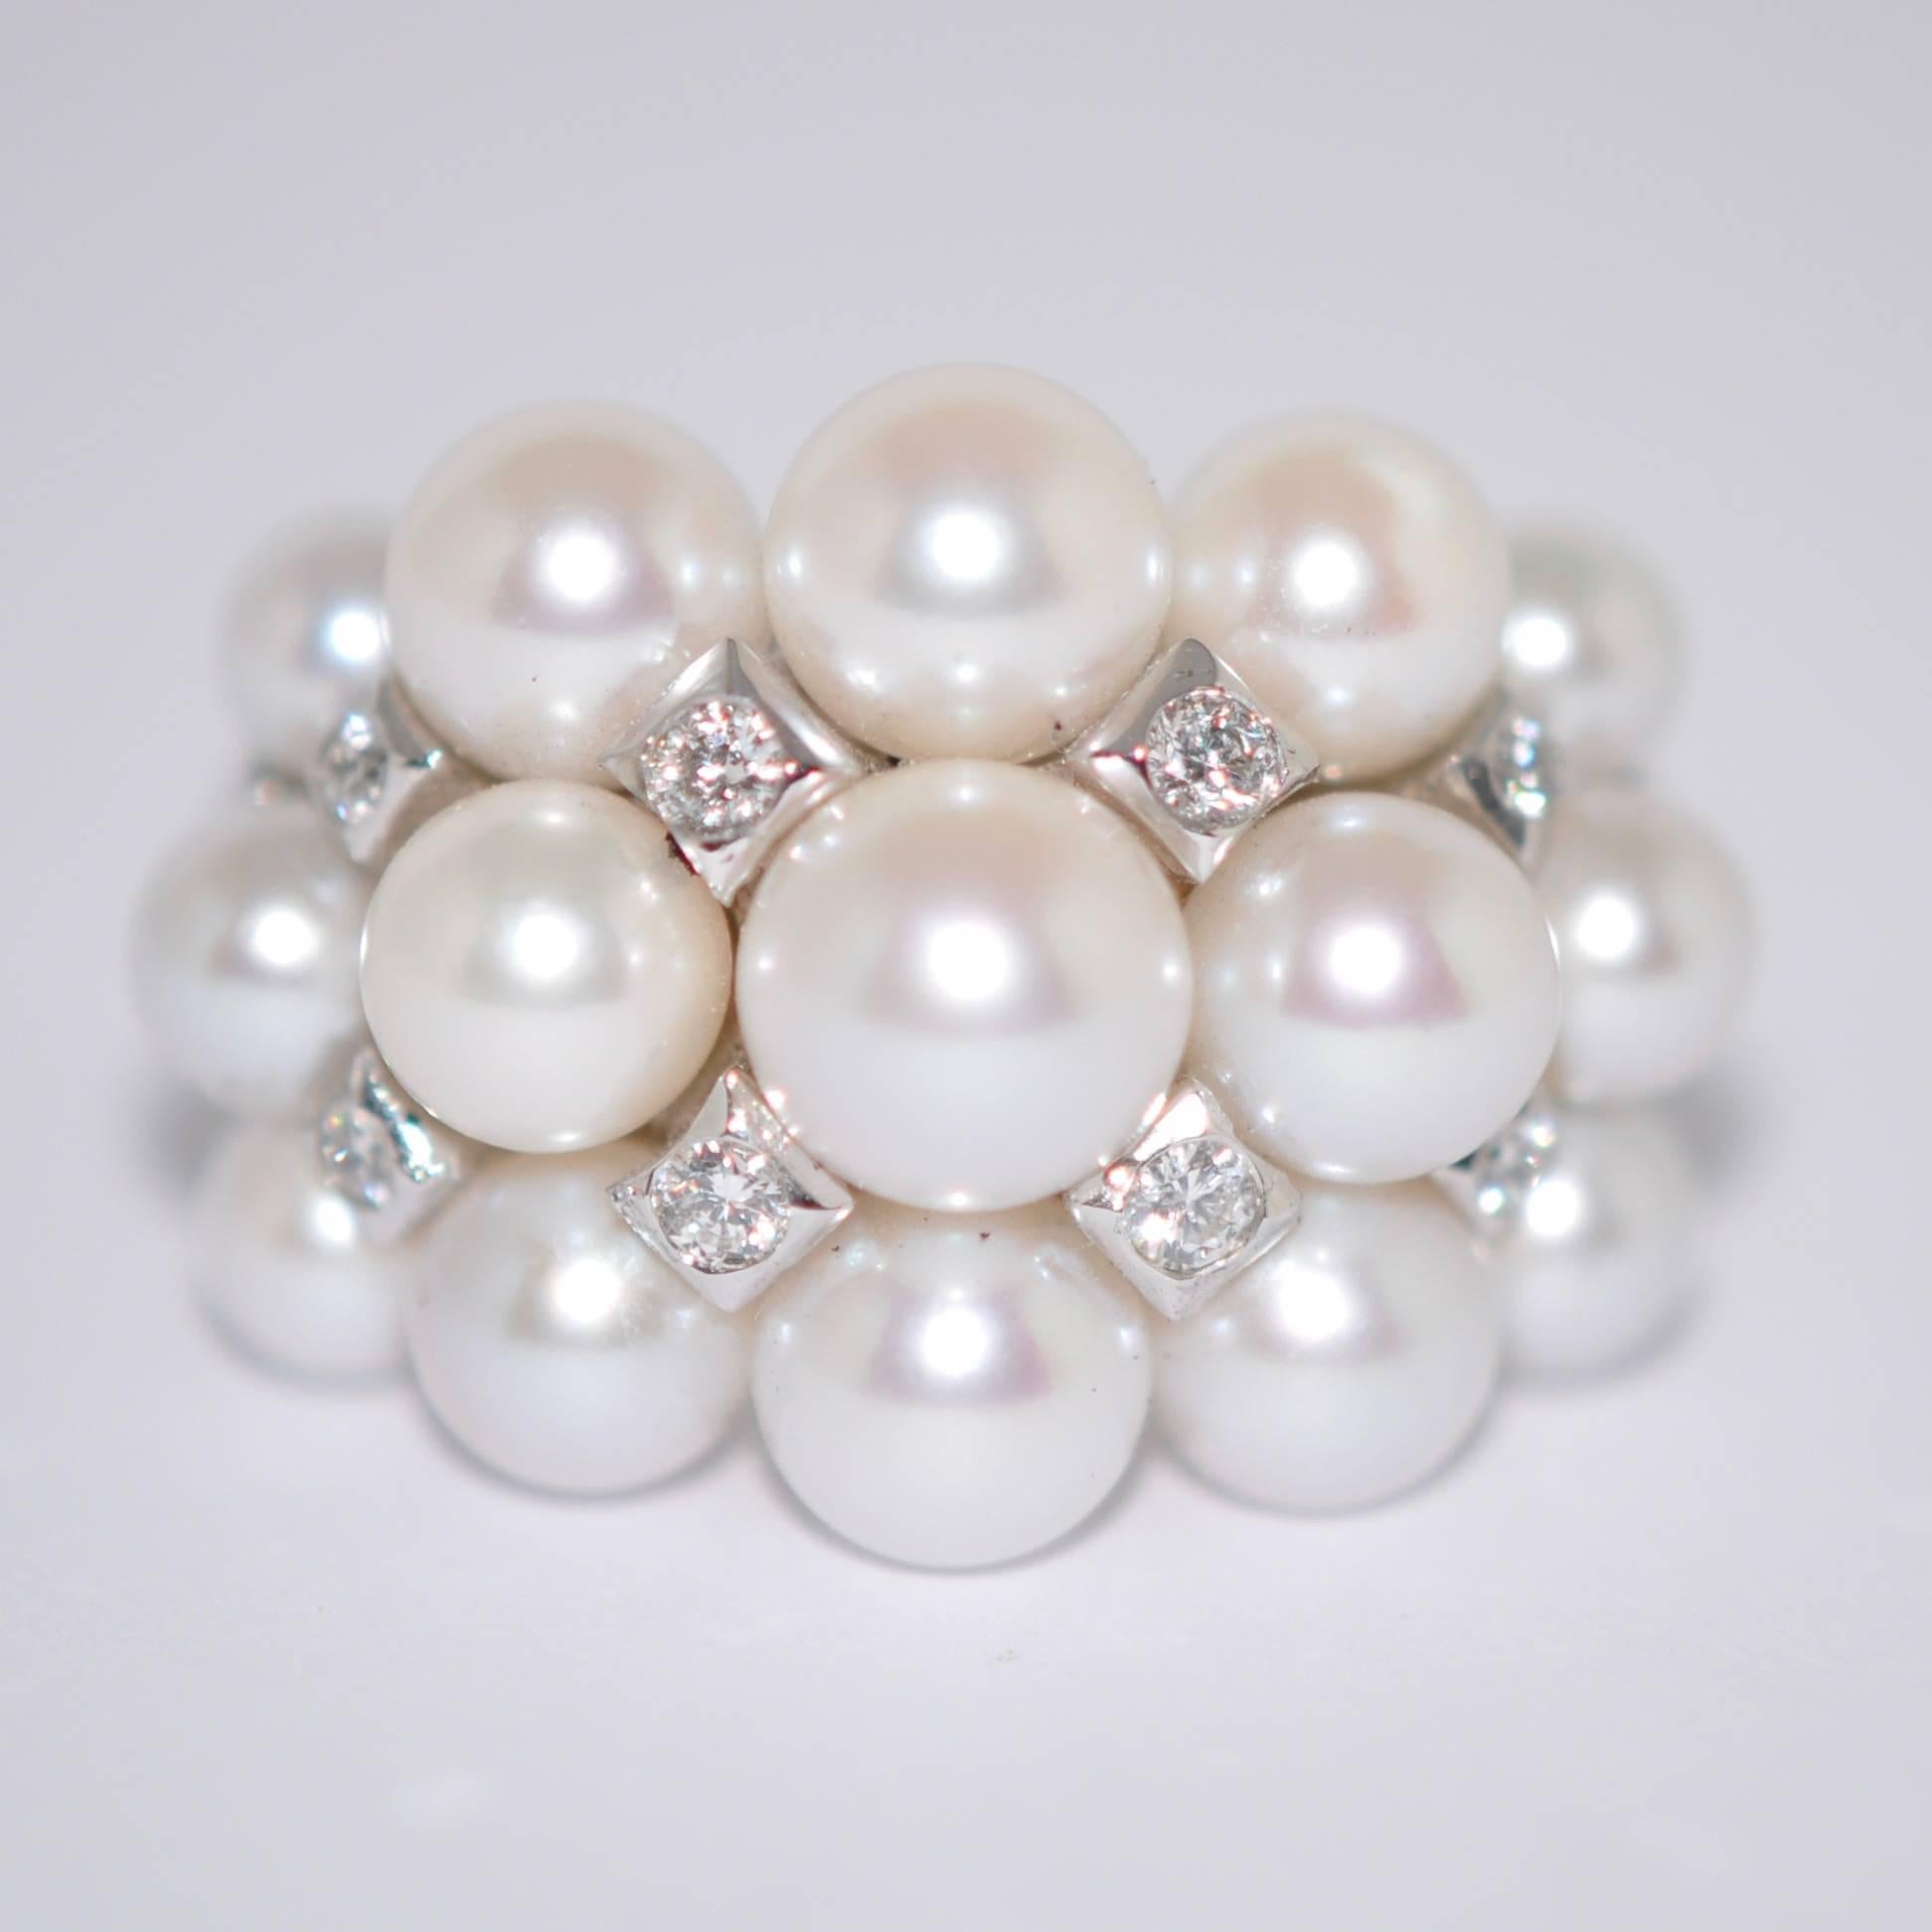 Women's Akoya Cultured Pearls and White Diamonds on White Gold 18 Karat Dome Ring